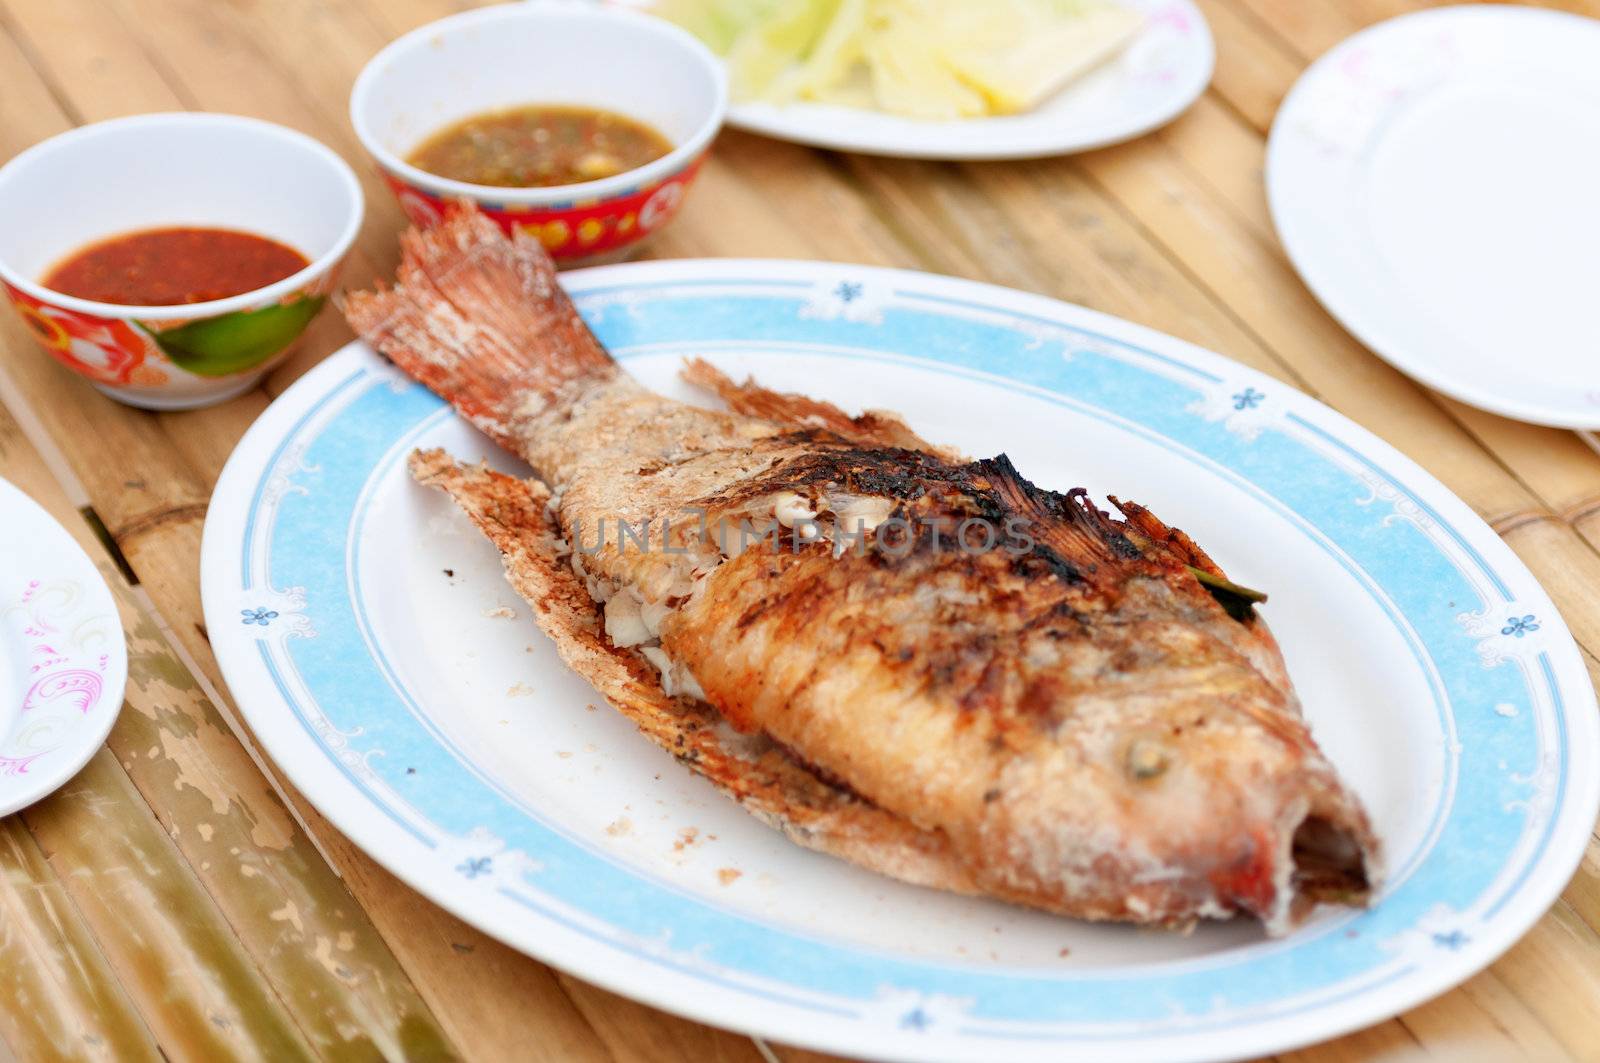 Two grilling sea fishes on plate with sauces. Shallow depth of field, focus on fish middle.